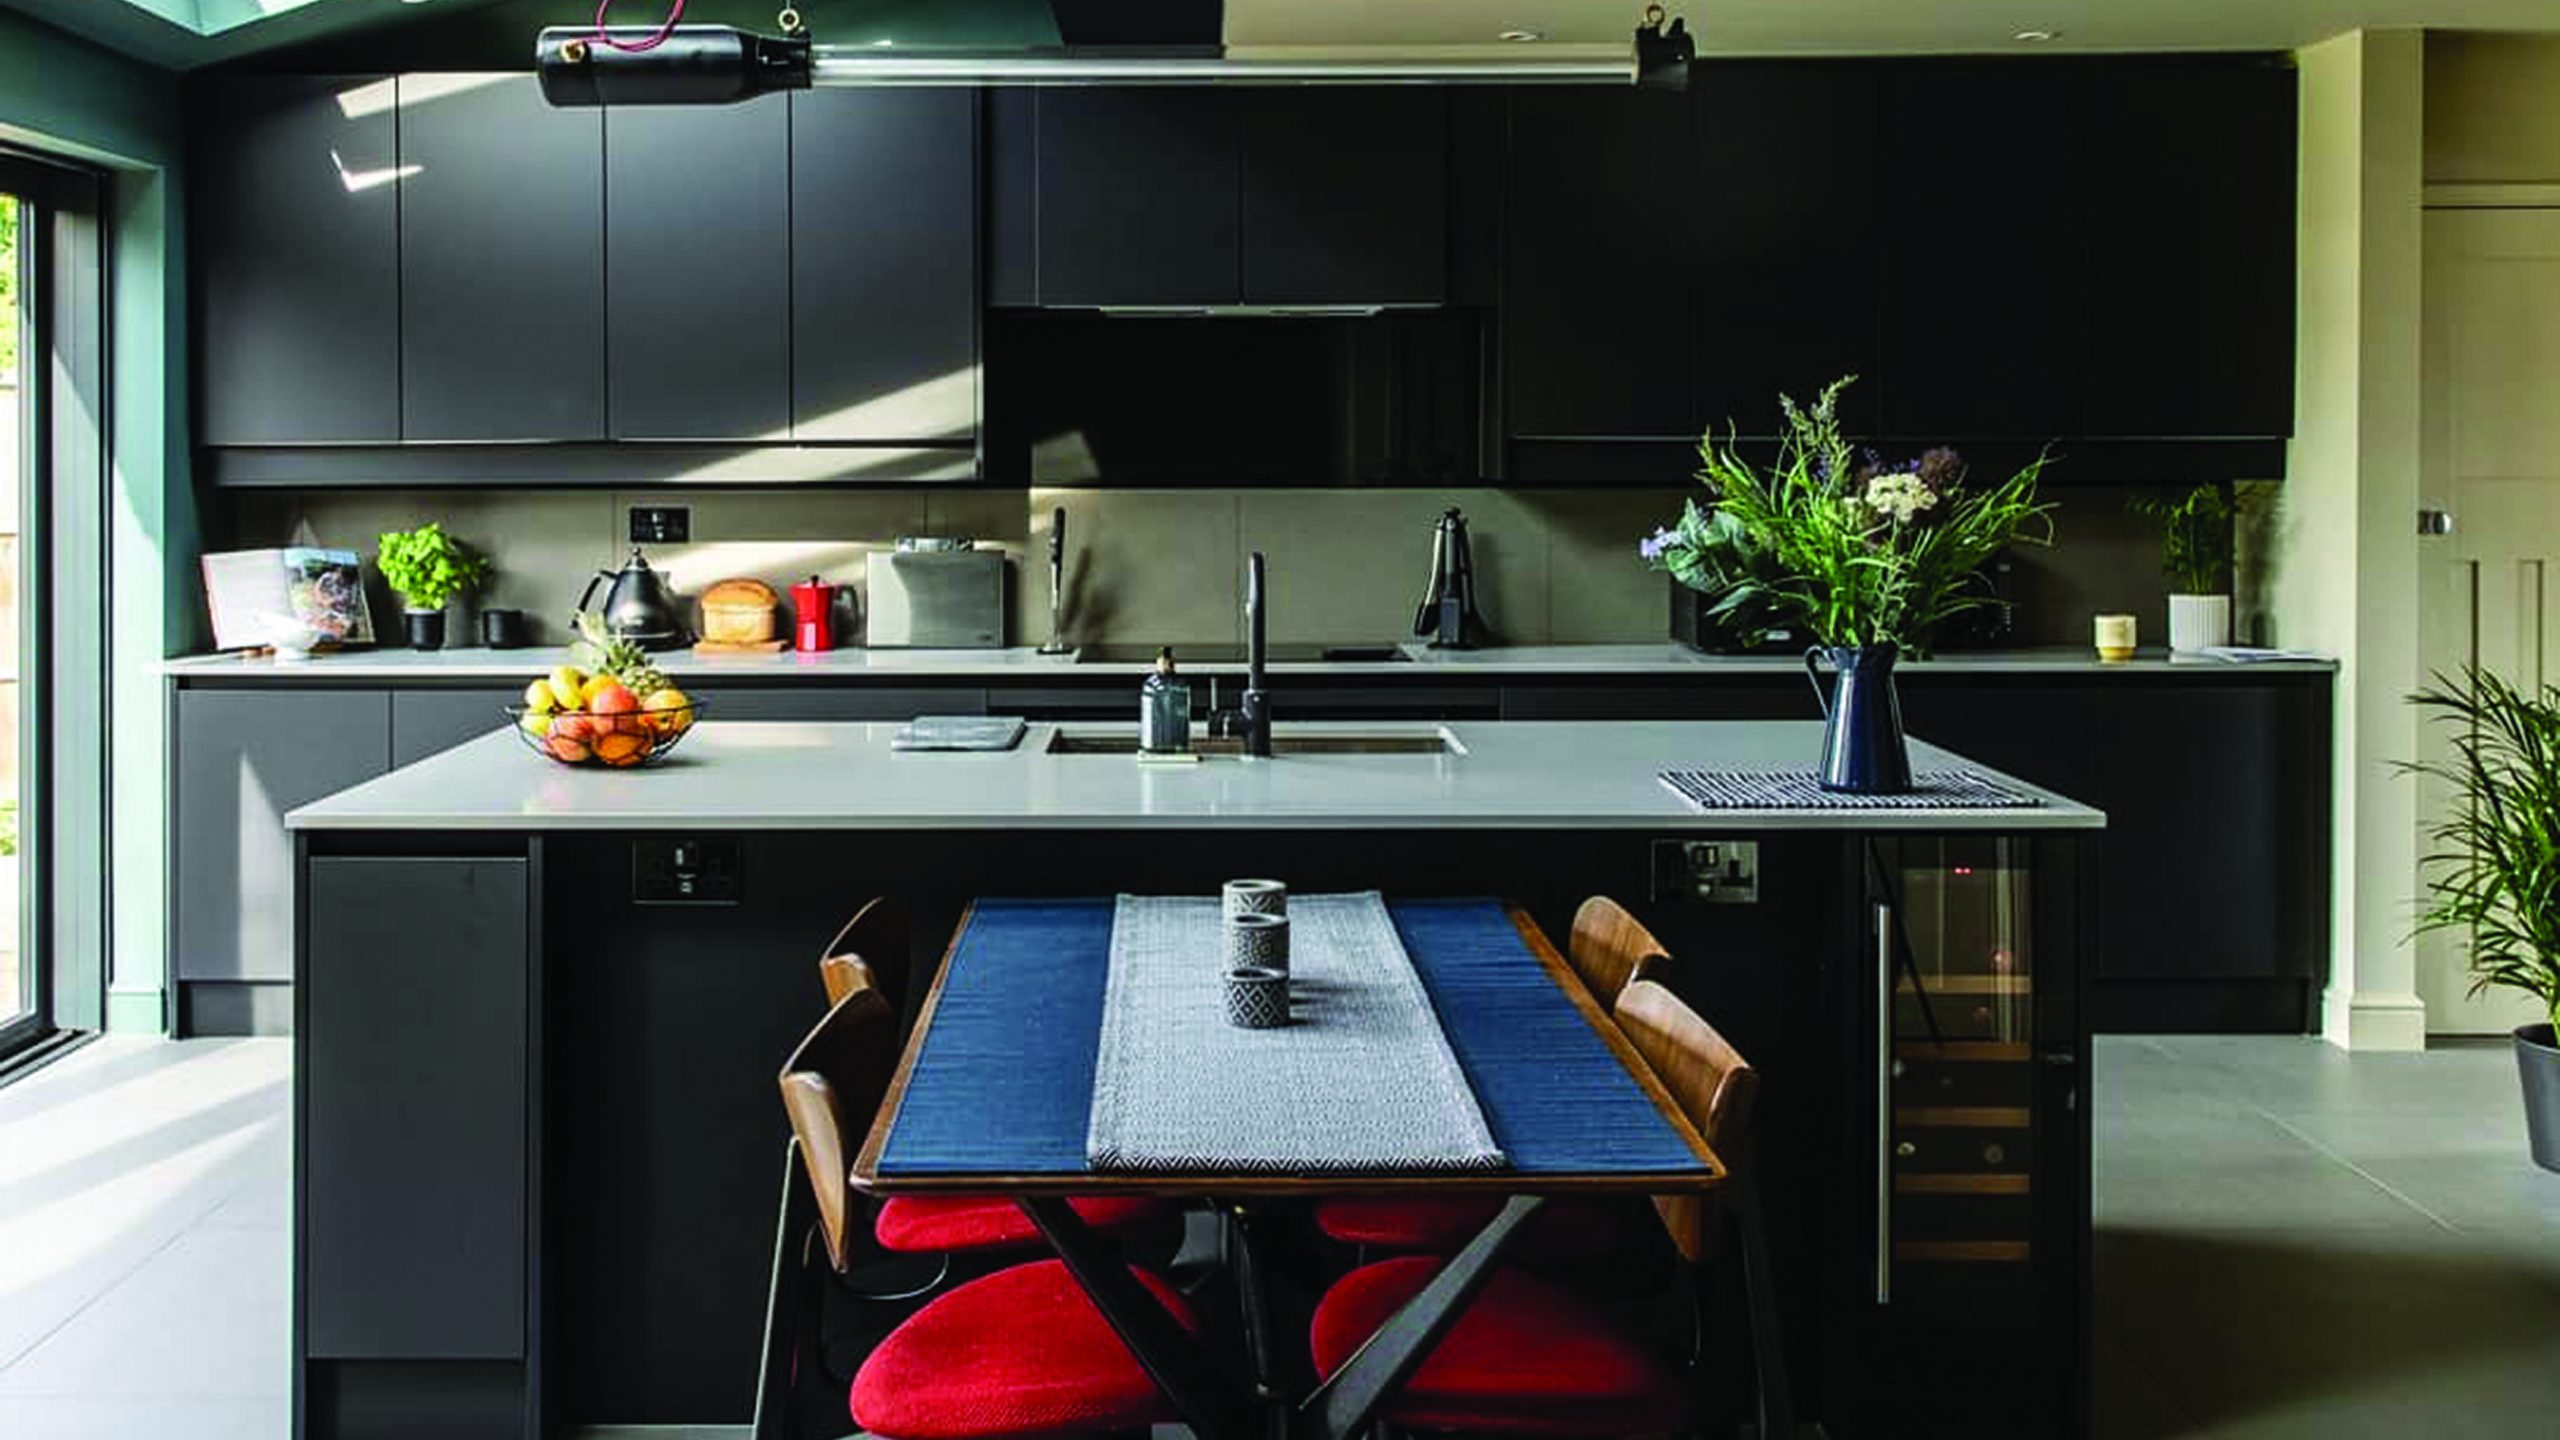 How to Design a Classic Black and White Kitchen   Wren Kitchens